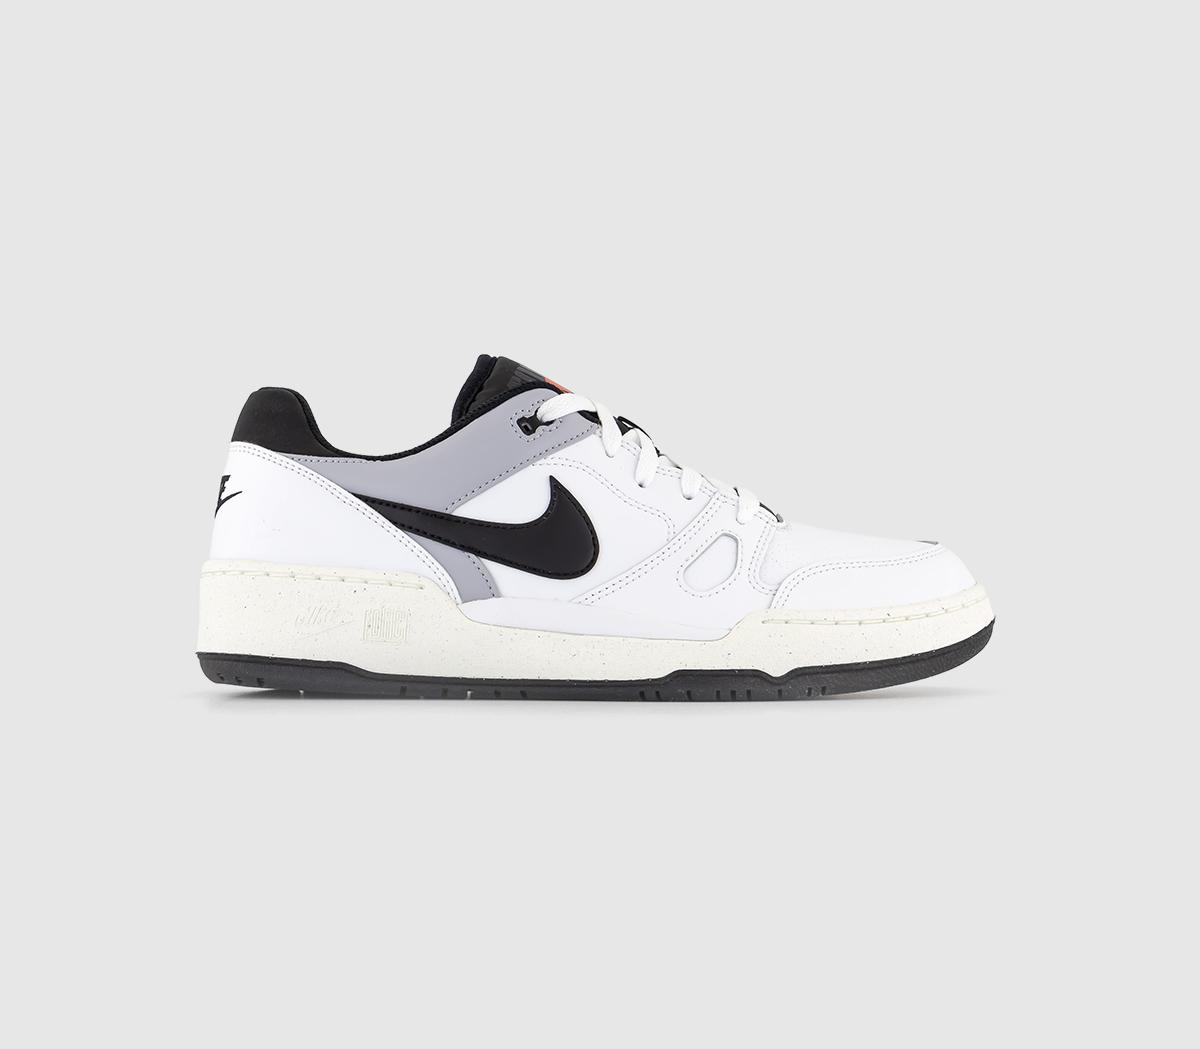 Full Force Trainers White Black Pewter Sail